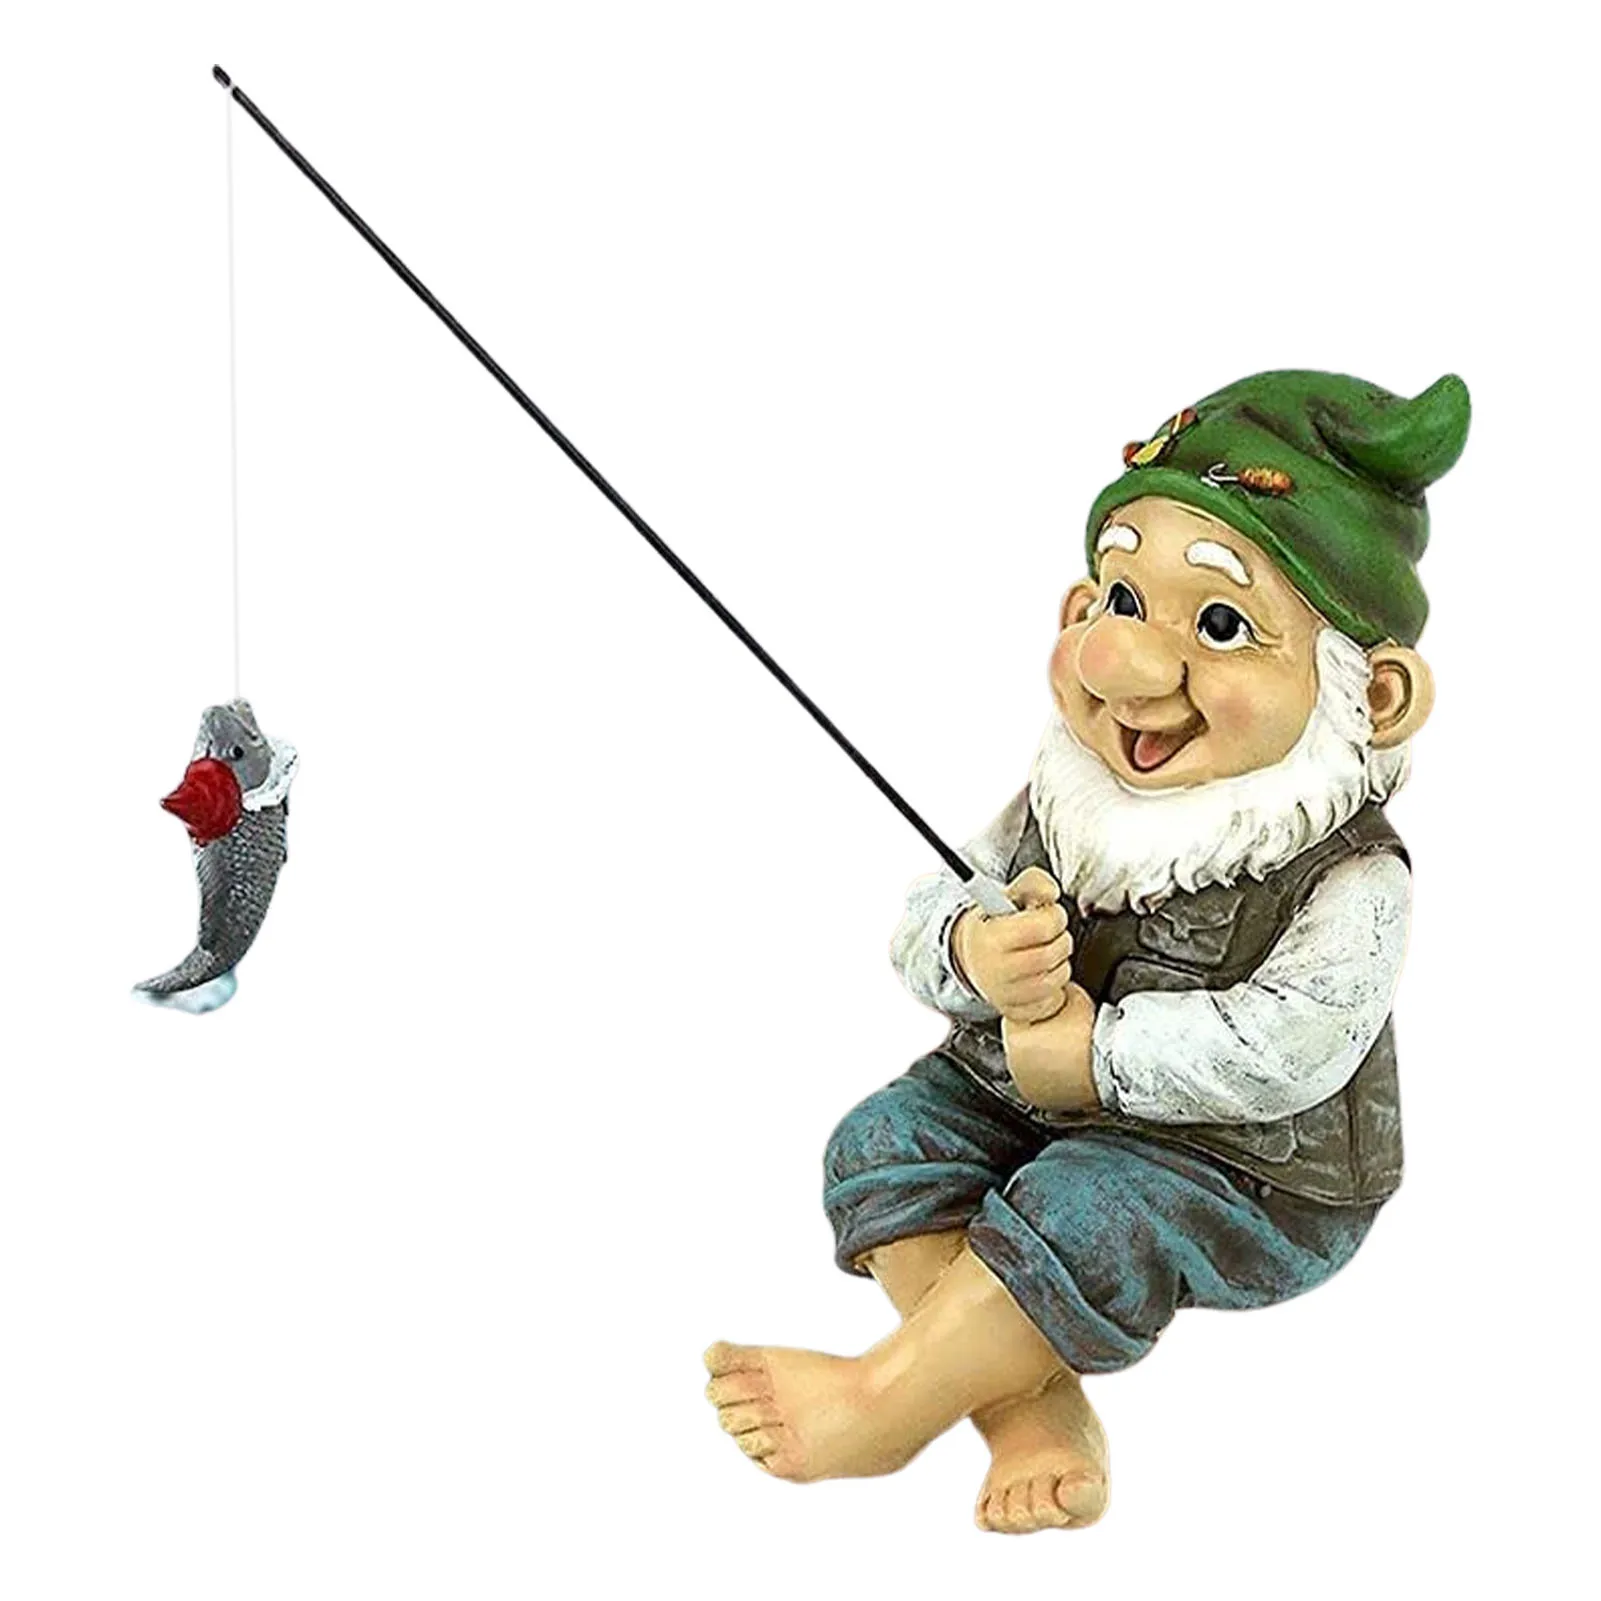 

Garden Gnome Statue Ziggy The Fishing Gnome Sitter Funny Lawn Dwarf Statues Outdoor Landscape Ornaments For Yard Lawn Pond Pool